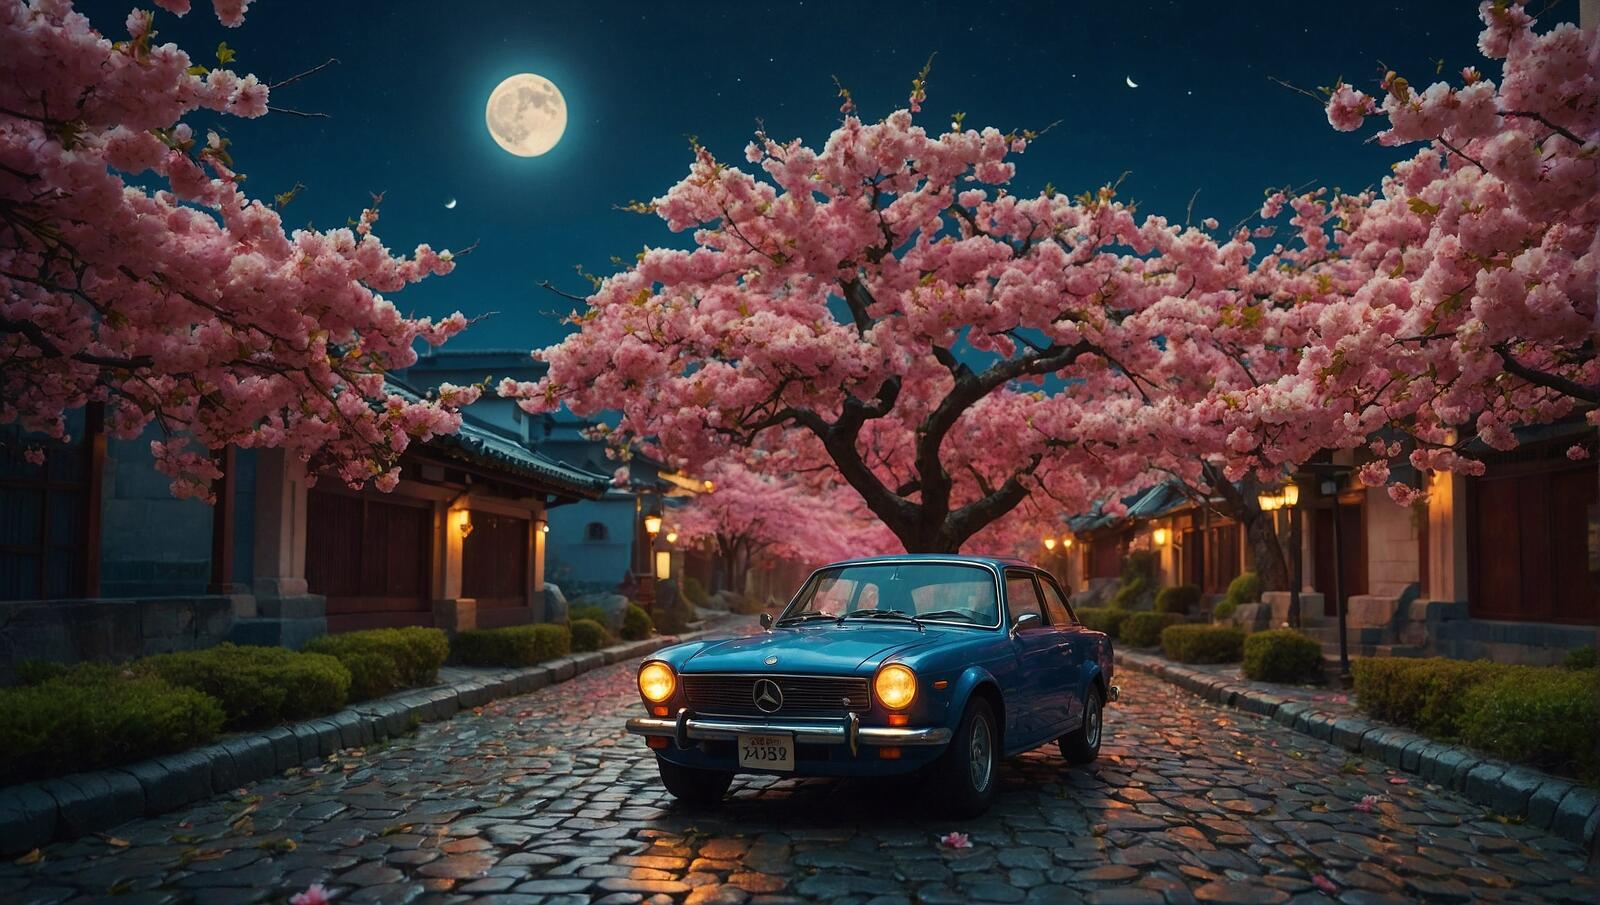 Free photo A car parked on the cobblestones next to cherry blossom trees.